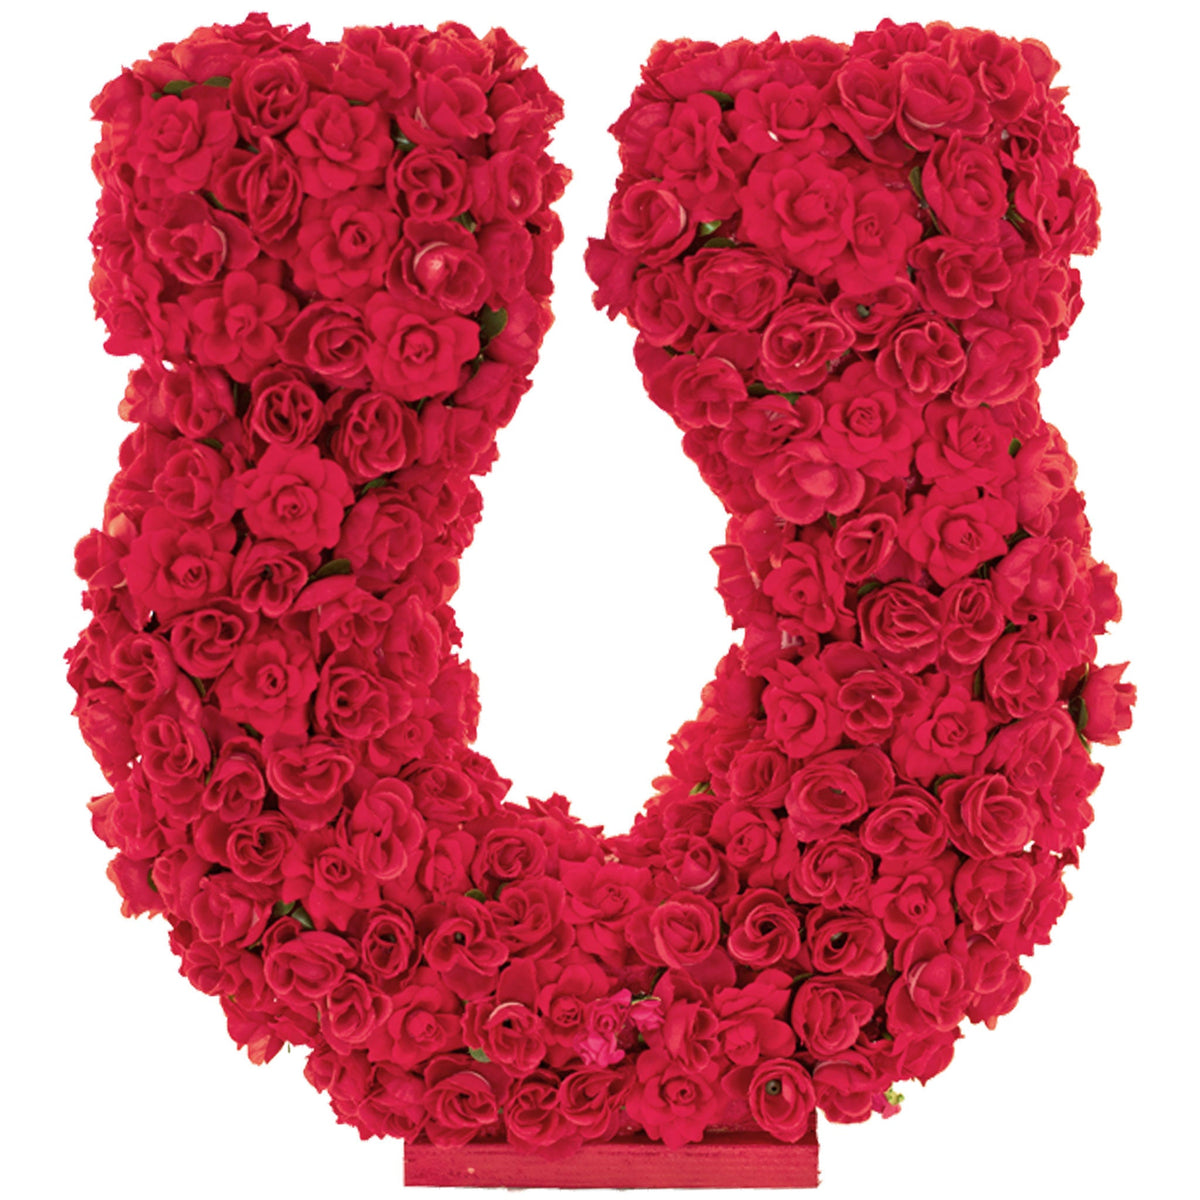 18in tall Rose Petal Horseshoe Centerpiece and Tabletop Display made with artificial rosebud flowers on a foam core and a wooden base painted in red.